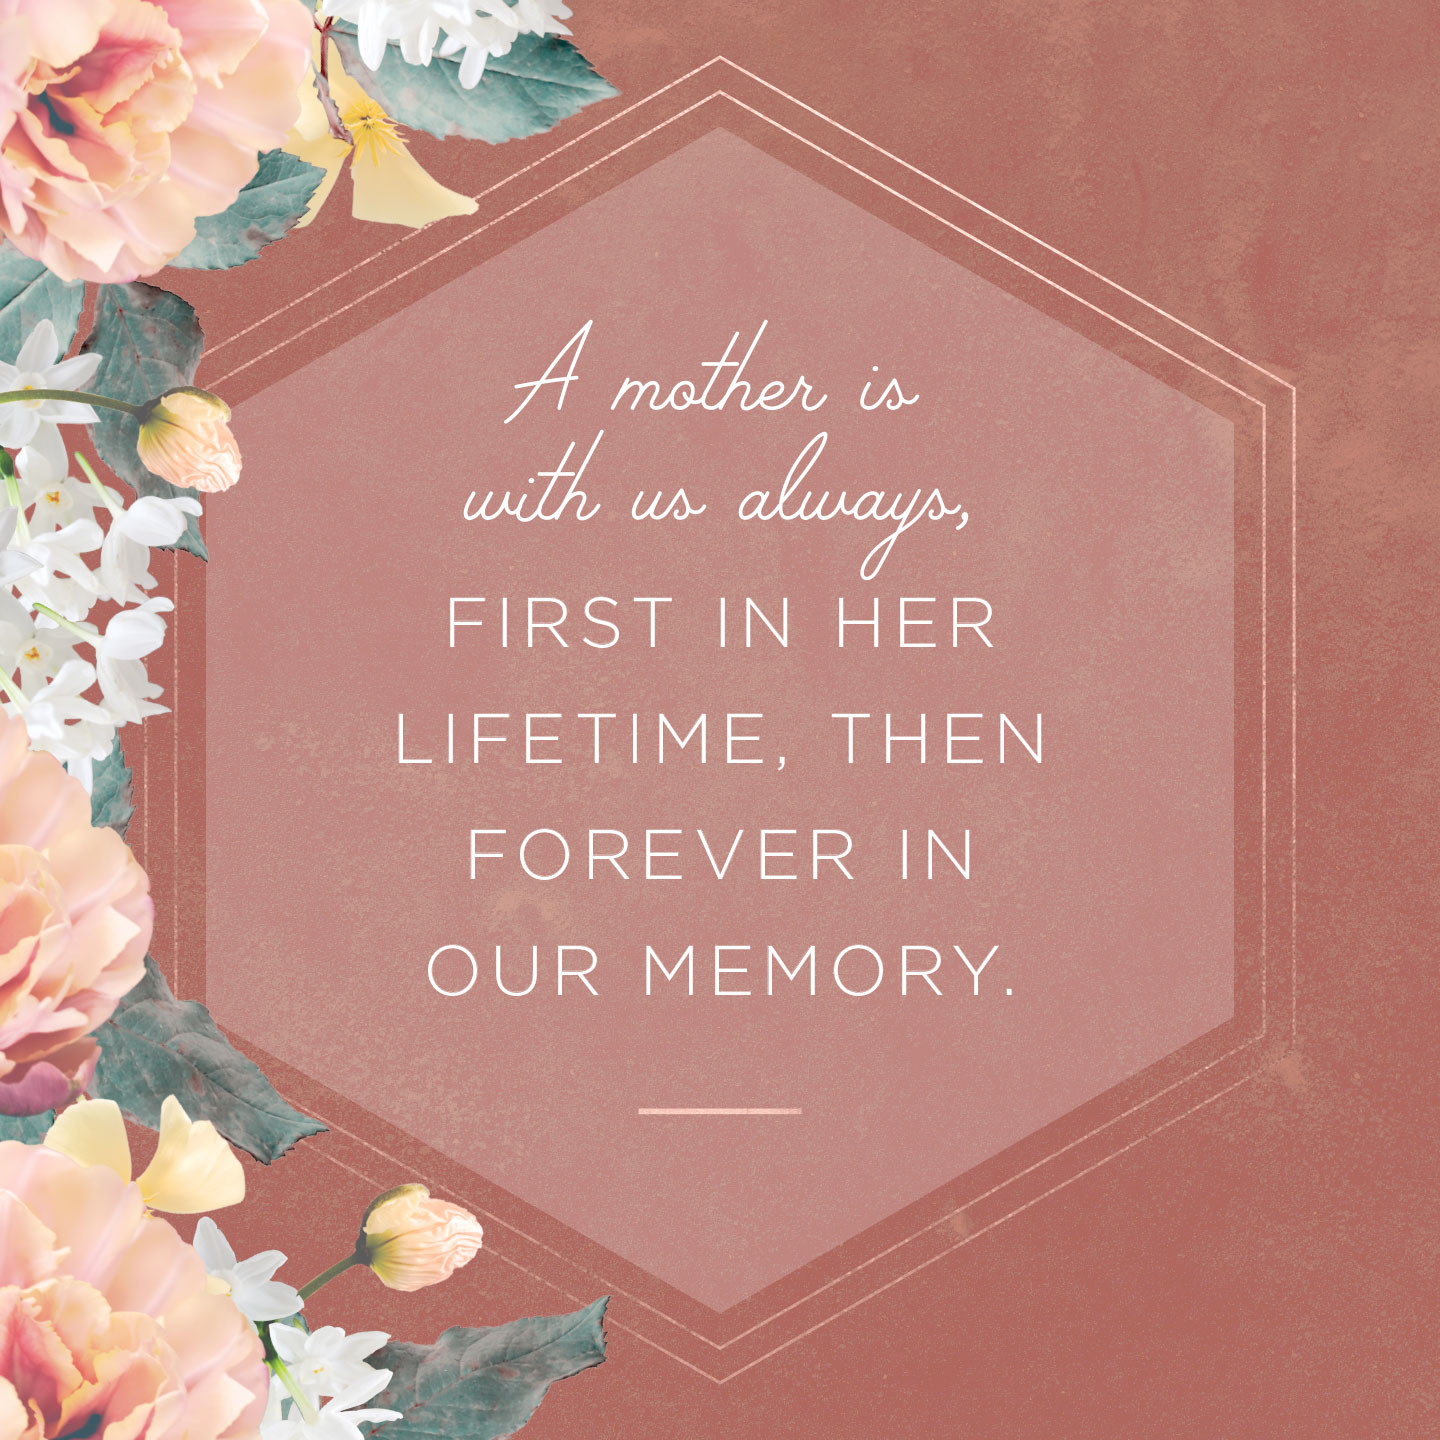 Sympathy Quotes For Loss Of Mother
 36 Sympathy Messages What to Write in a Condolence Card